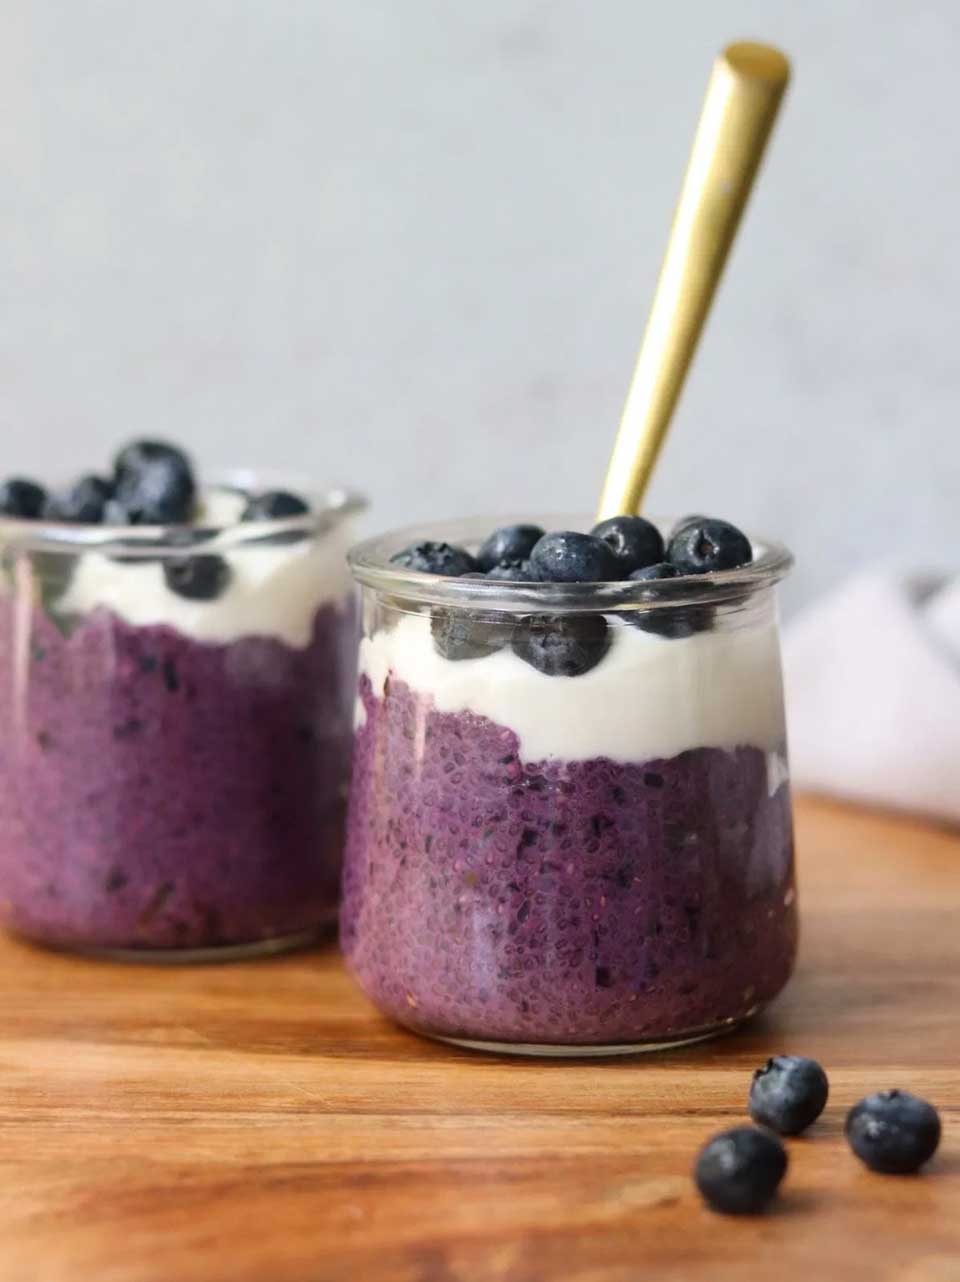 Side view of two glass jars of this layered recipe, garnished with blueberries.